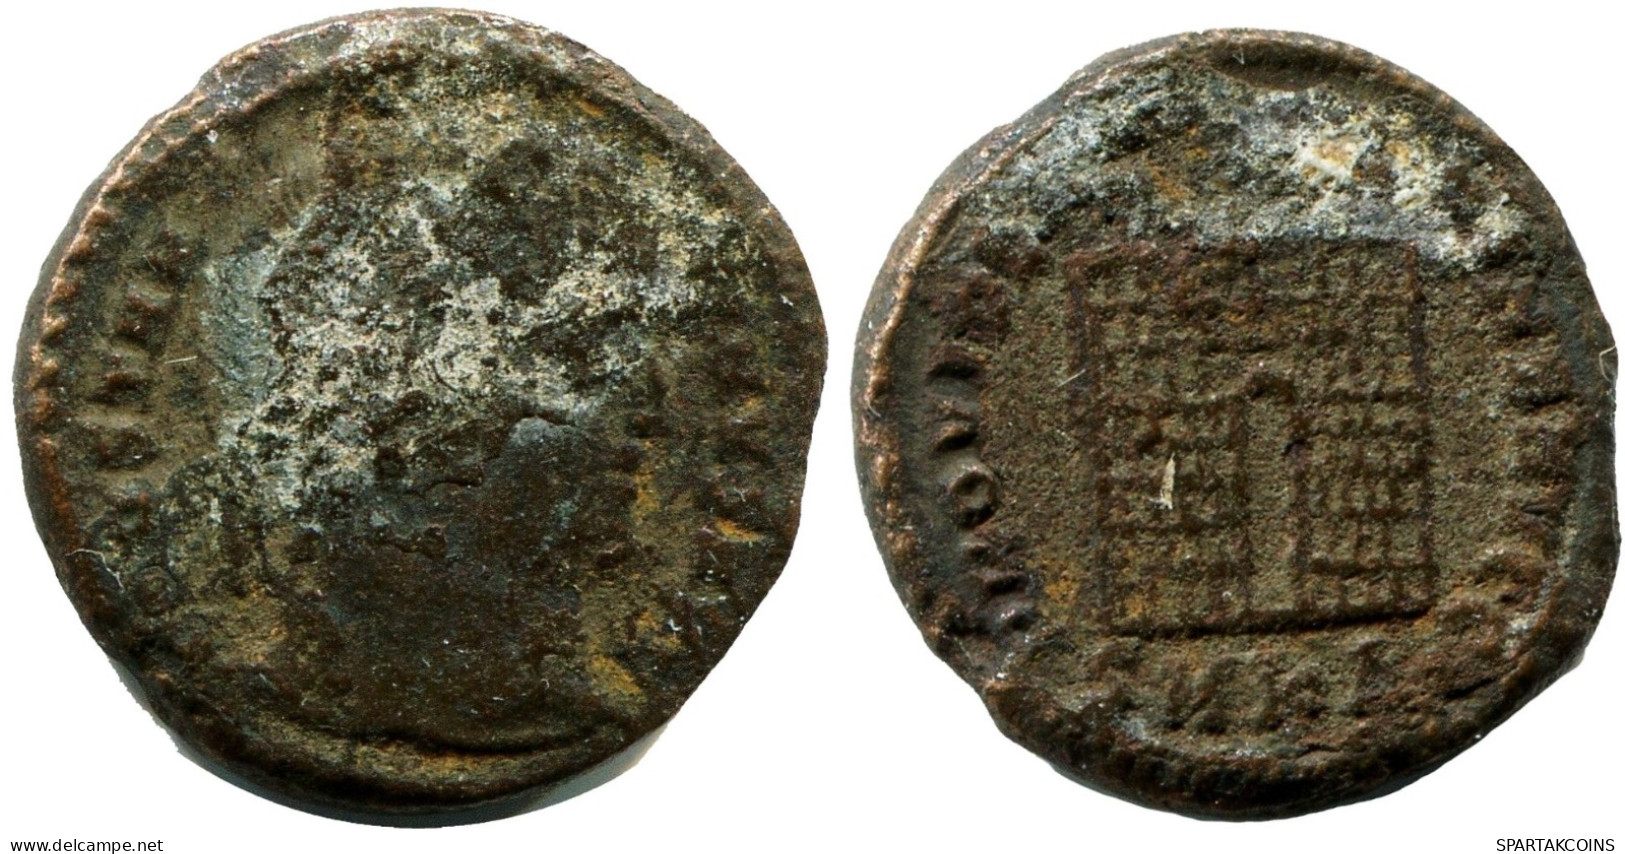 CONSTANTINE I MINTED IN CYZICUS FOUND IN IHNASYAH HOARD EGYPT #ANC11005.14.D.A - El Imperio Christiano (307 / 363)